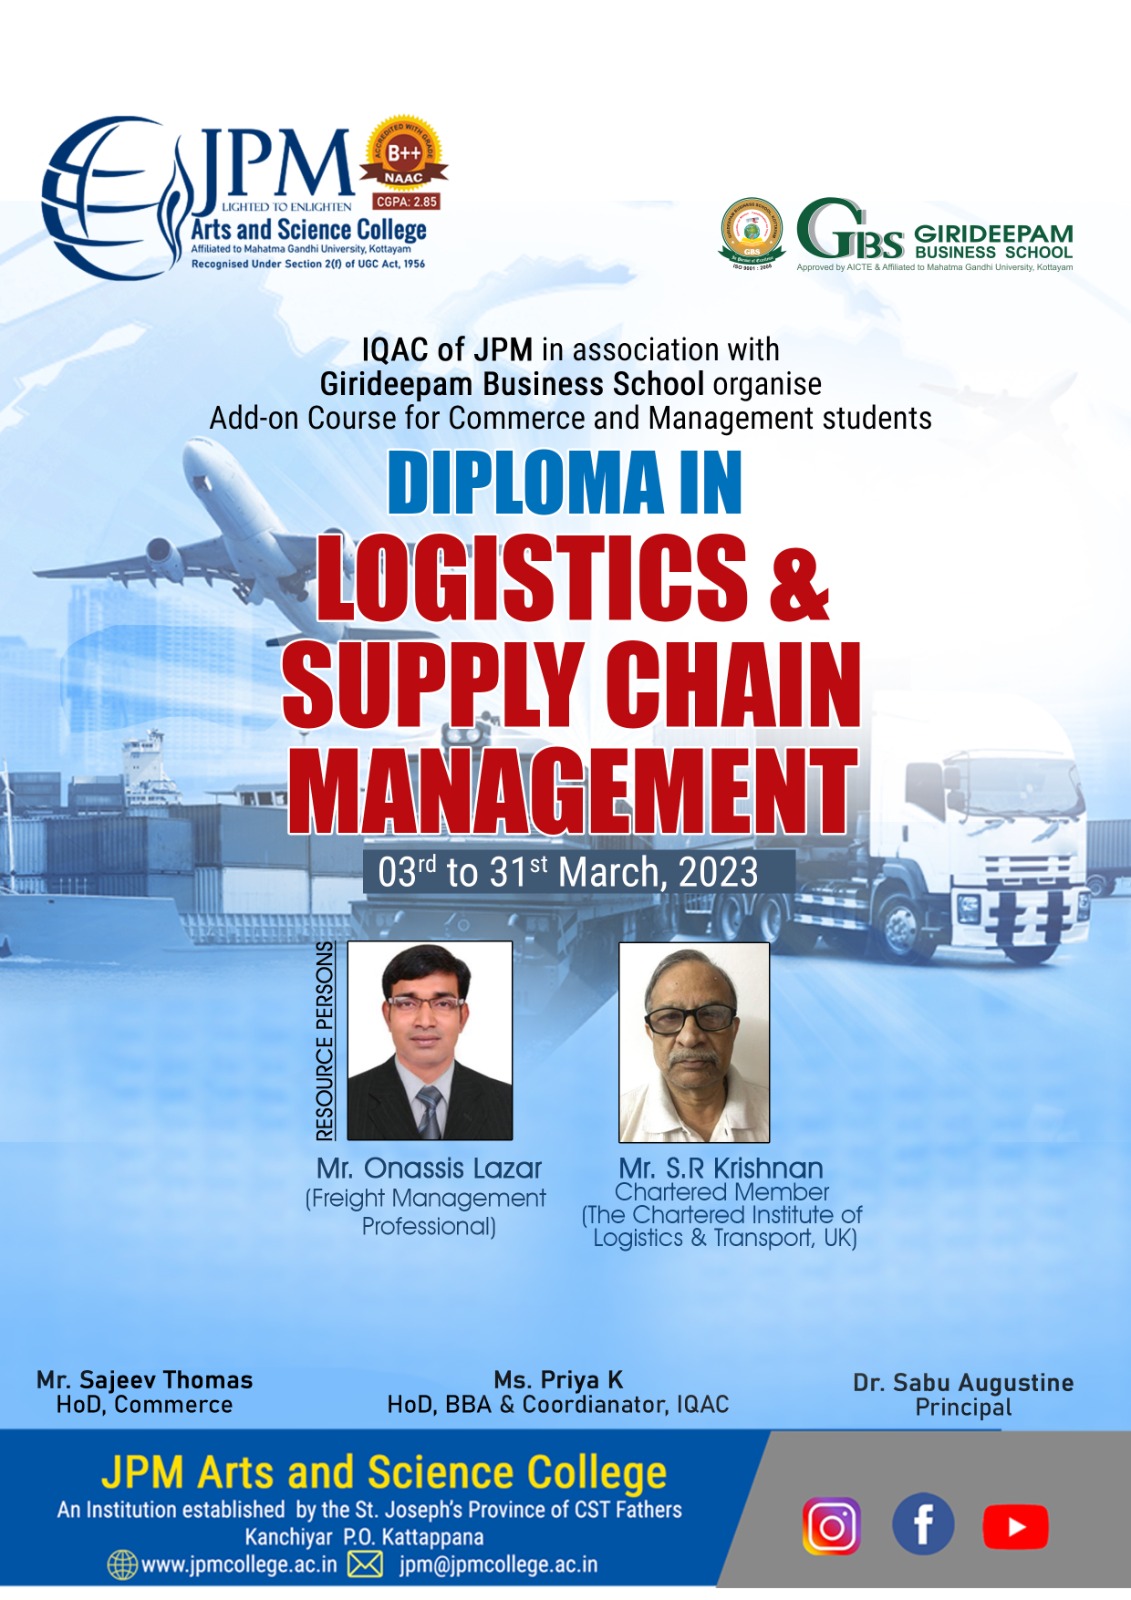 Diploma in Logistics & Supply Chain Management Add-on course for Commerce & Management students